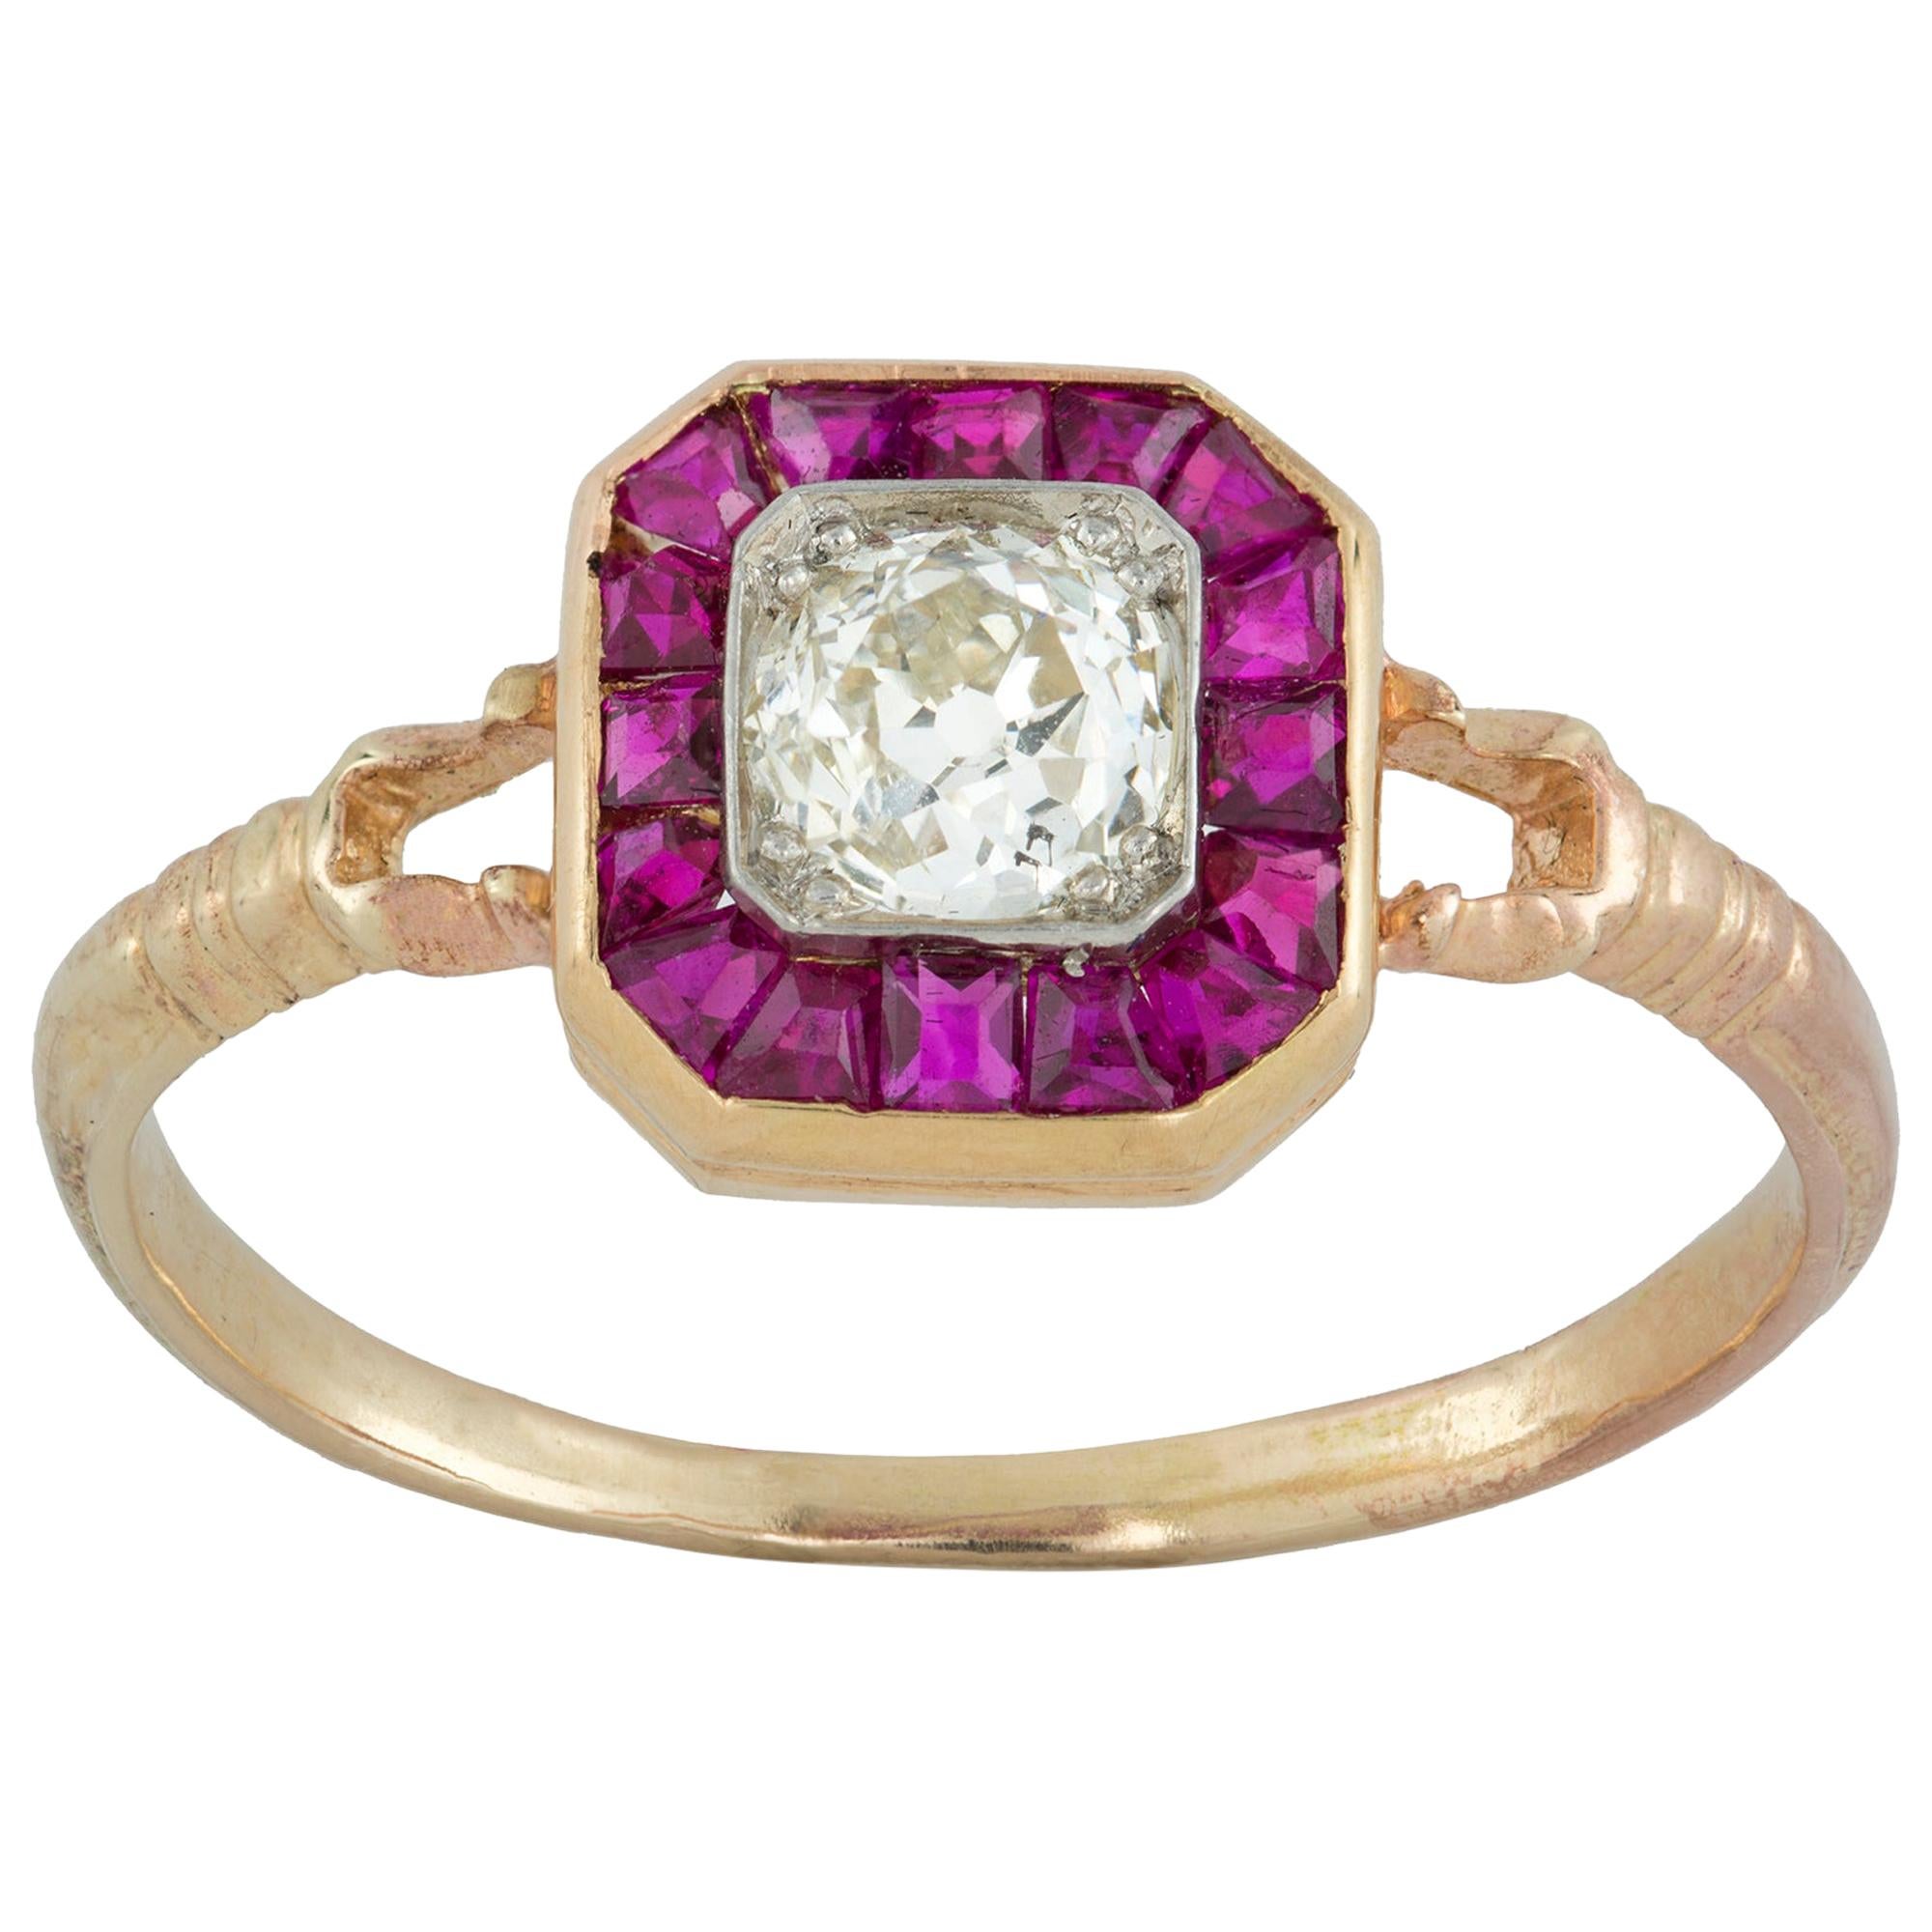 Diamond and Ruby Octagonal Cluster Ring